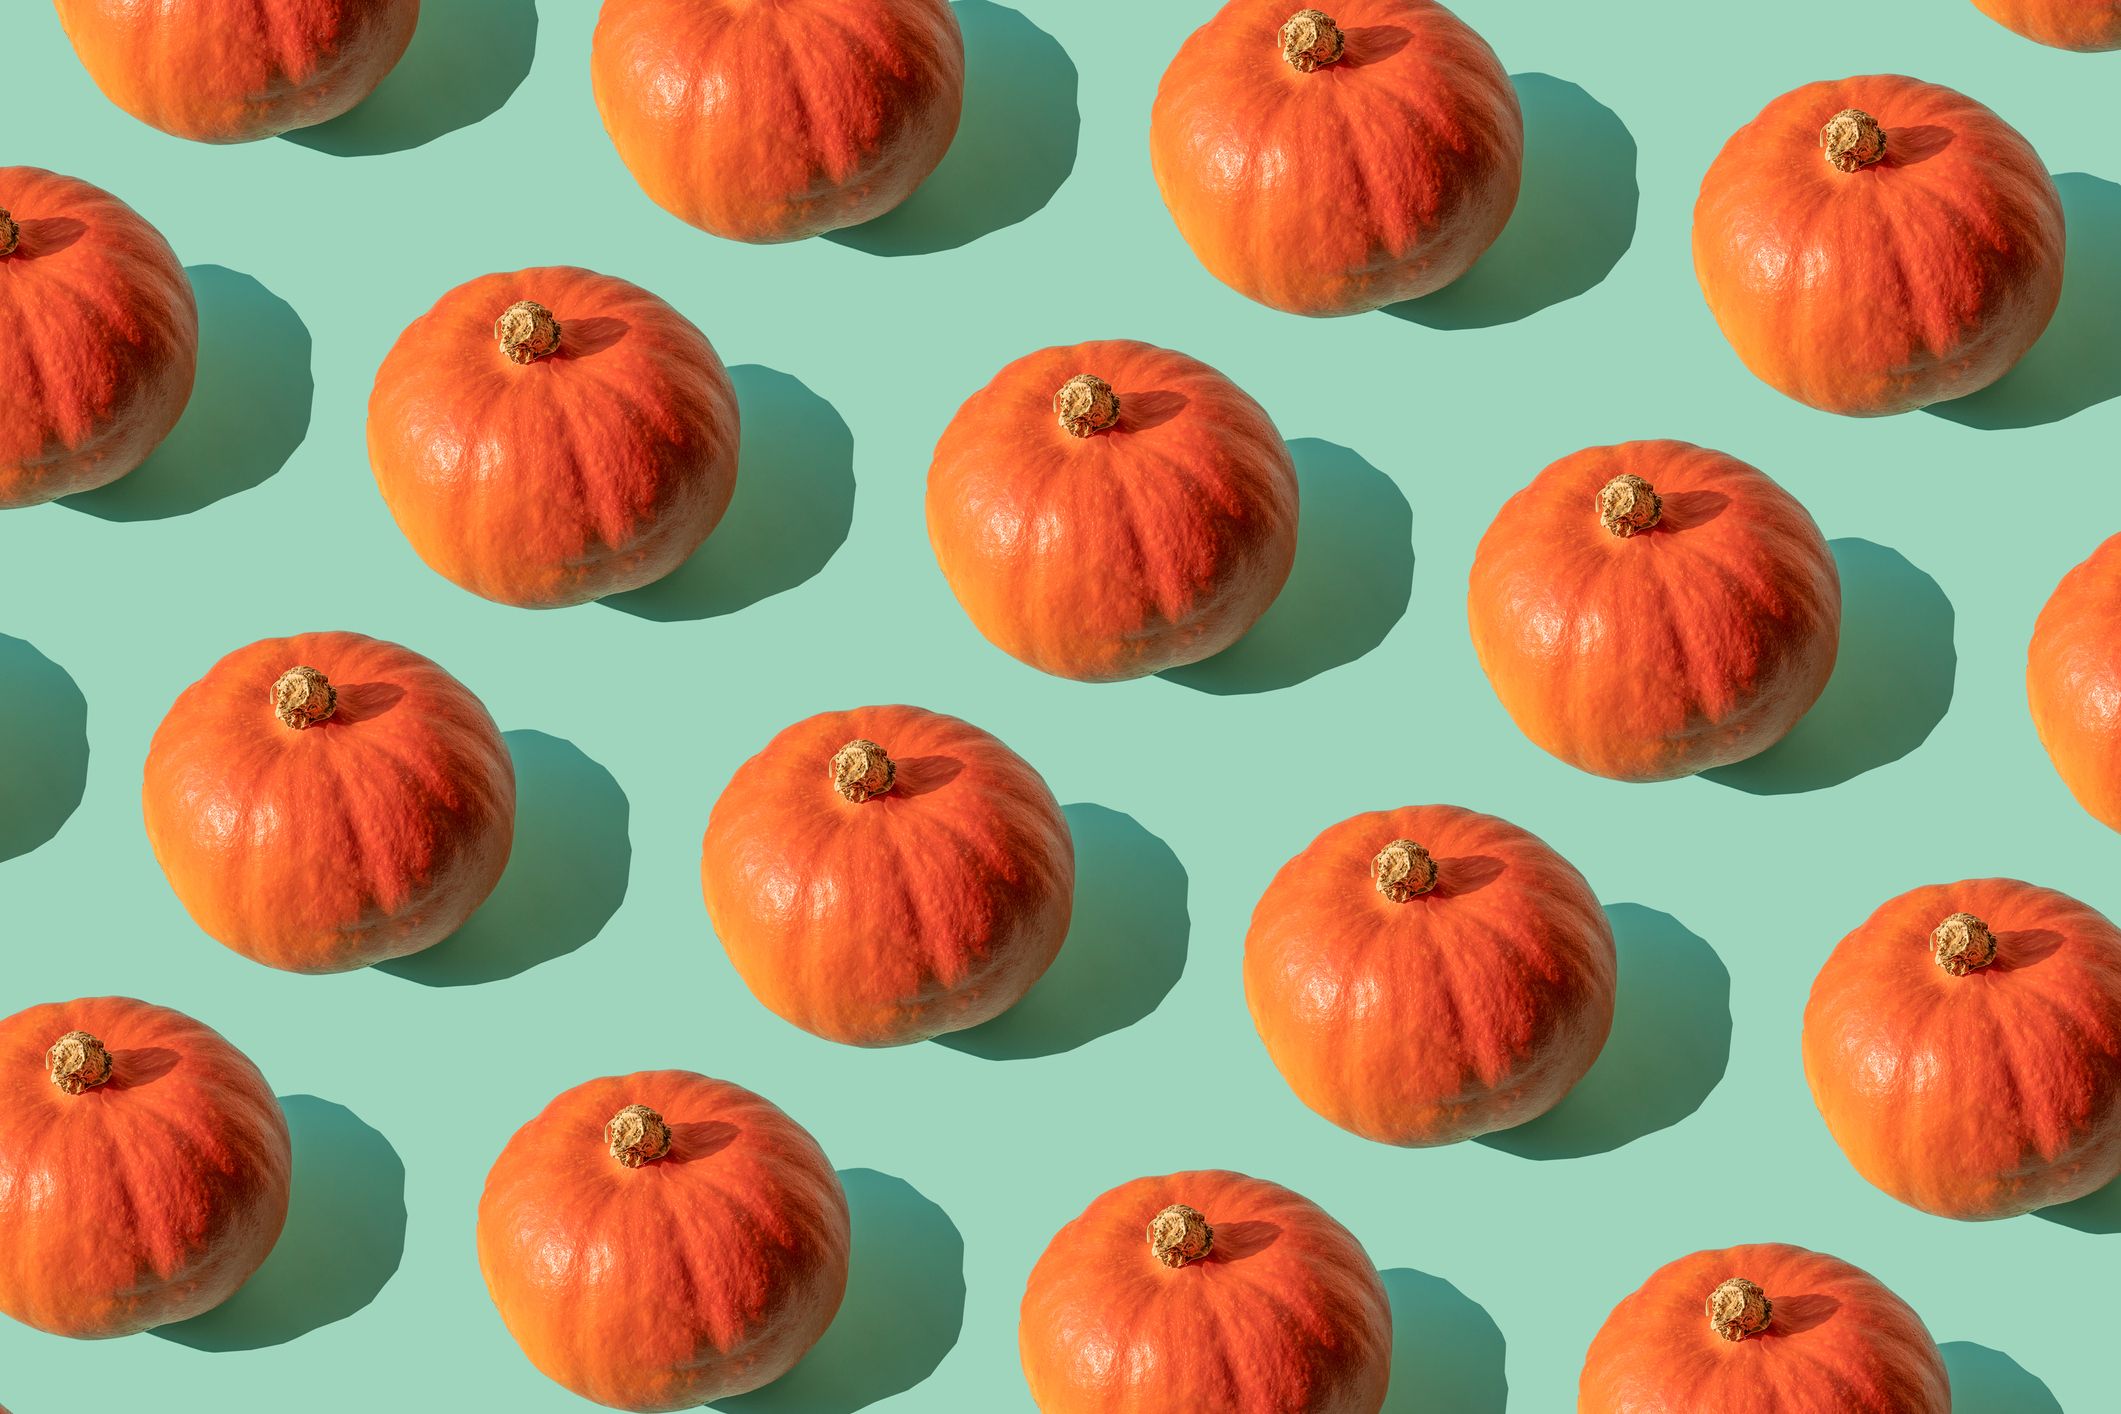 Is Pumpkin a Fruit or Vegetable? Pumpkin is a Fruit - Here's Why.